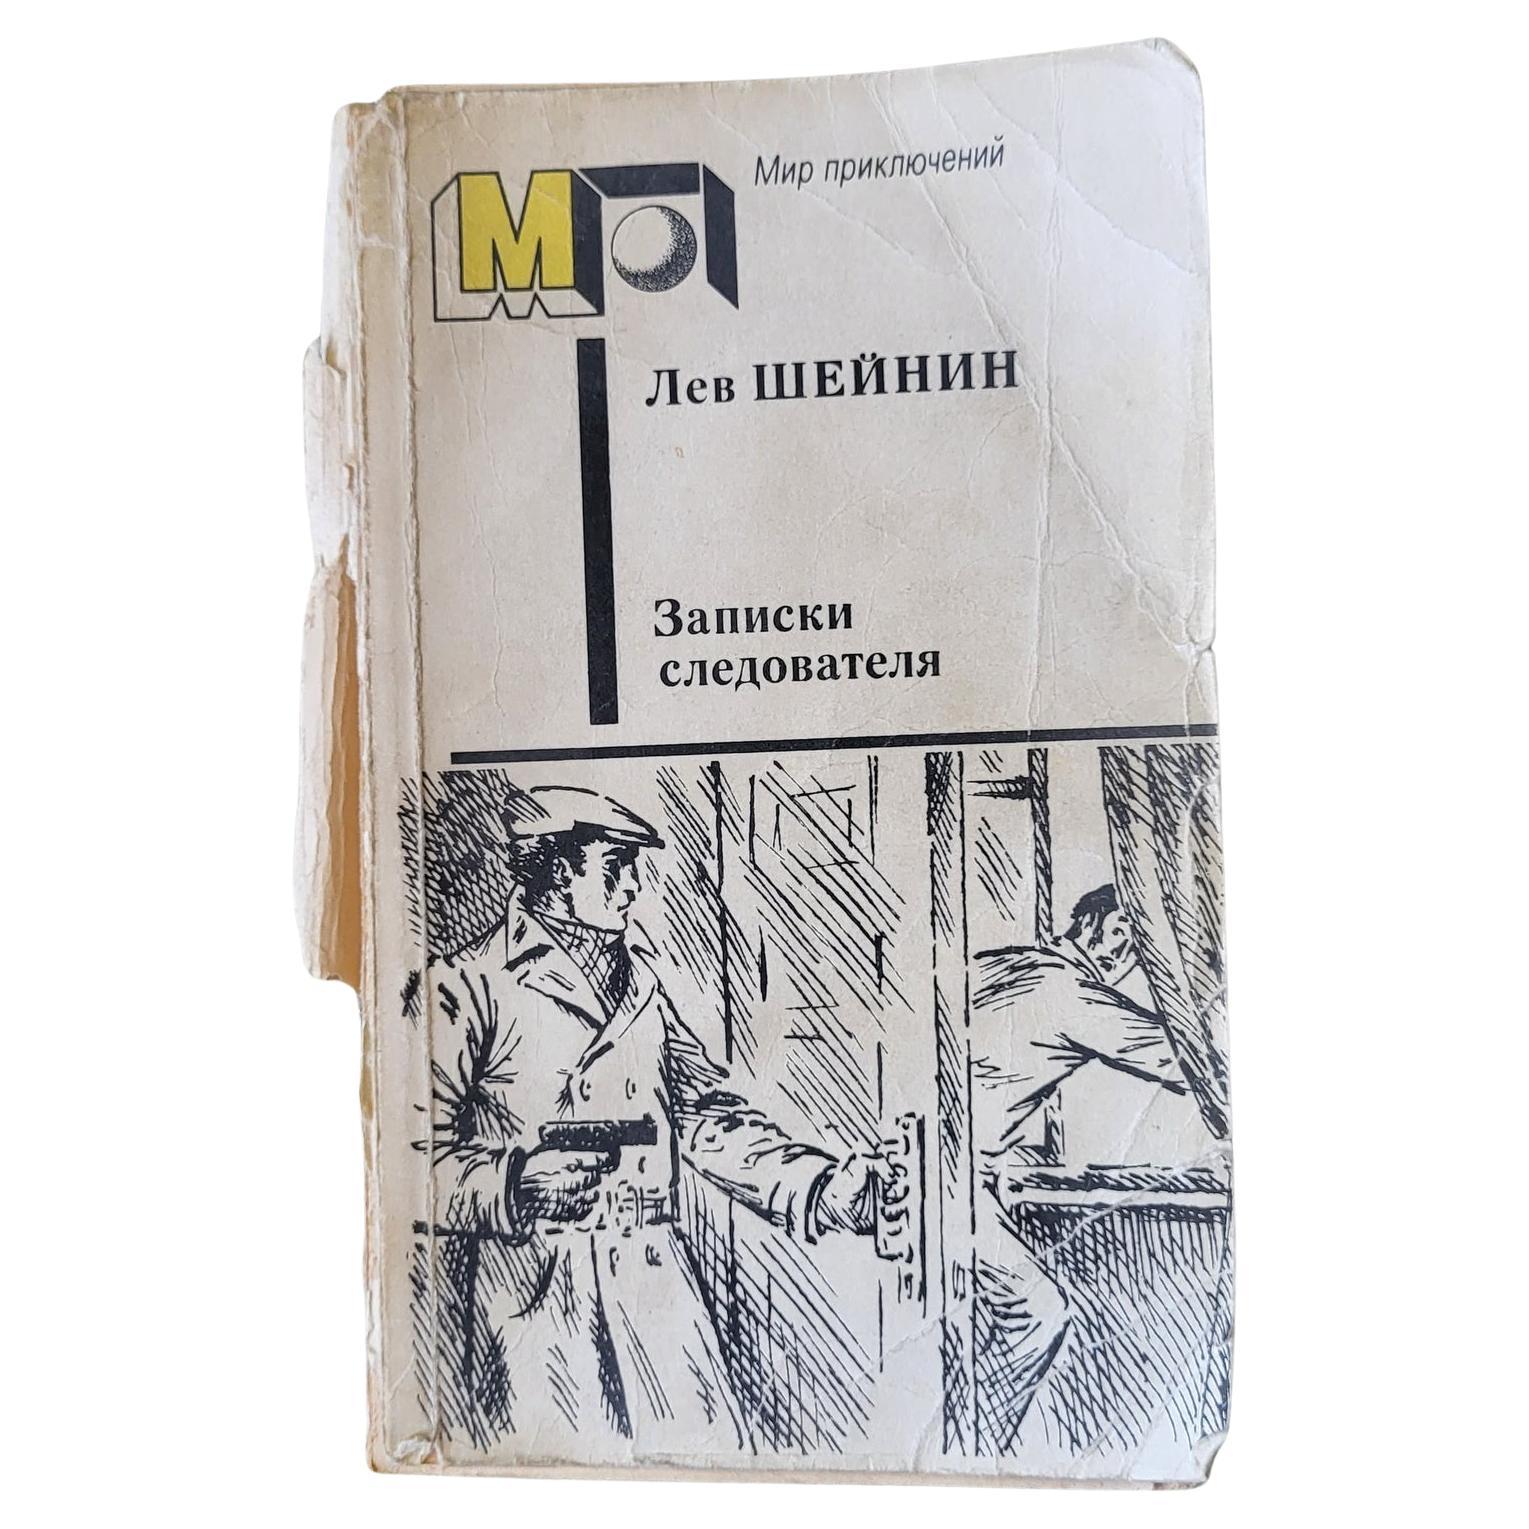  Vintage Detective Story Book by Lev Sheinin from USSR, circa 1986 1j21